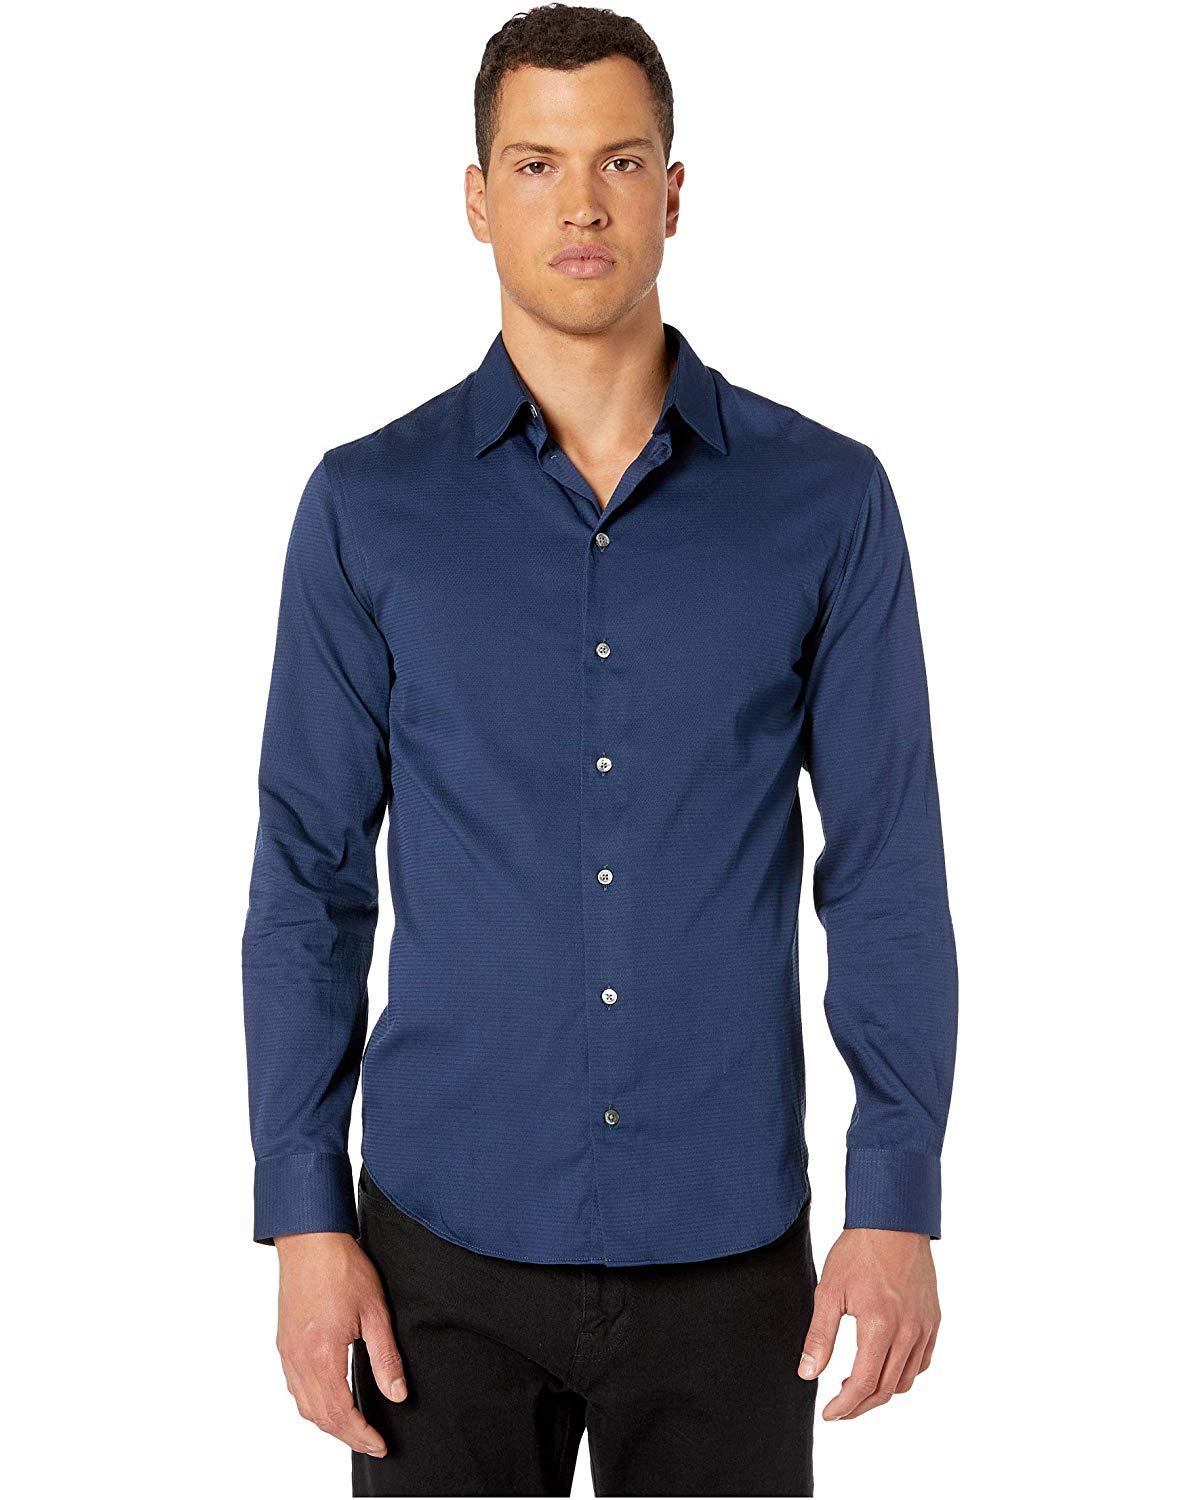 Emporio Armani Cotton Camica Shirt in Navy (Blue) for Men - Lyst